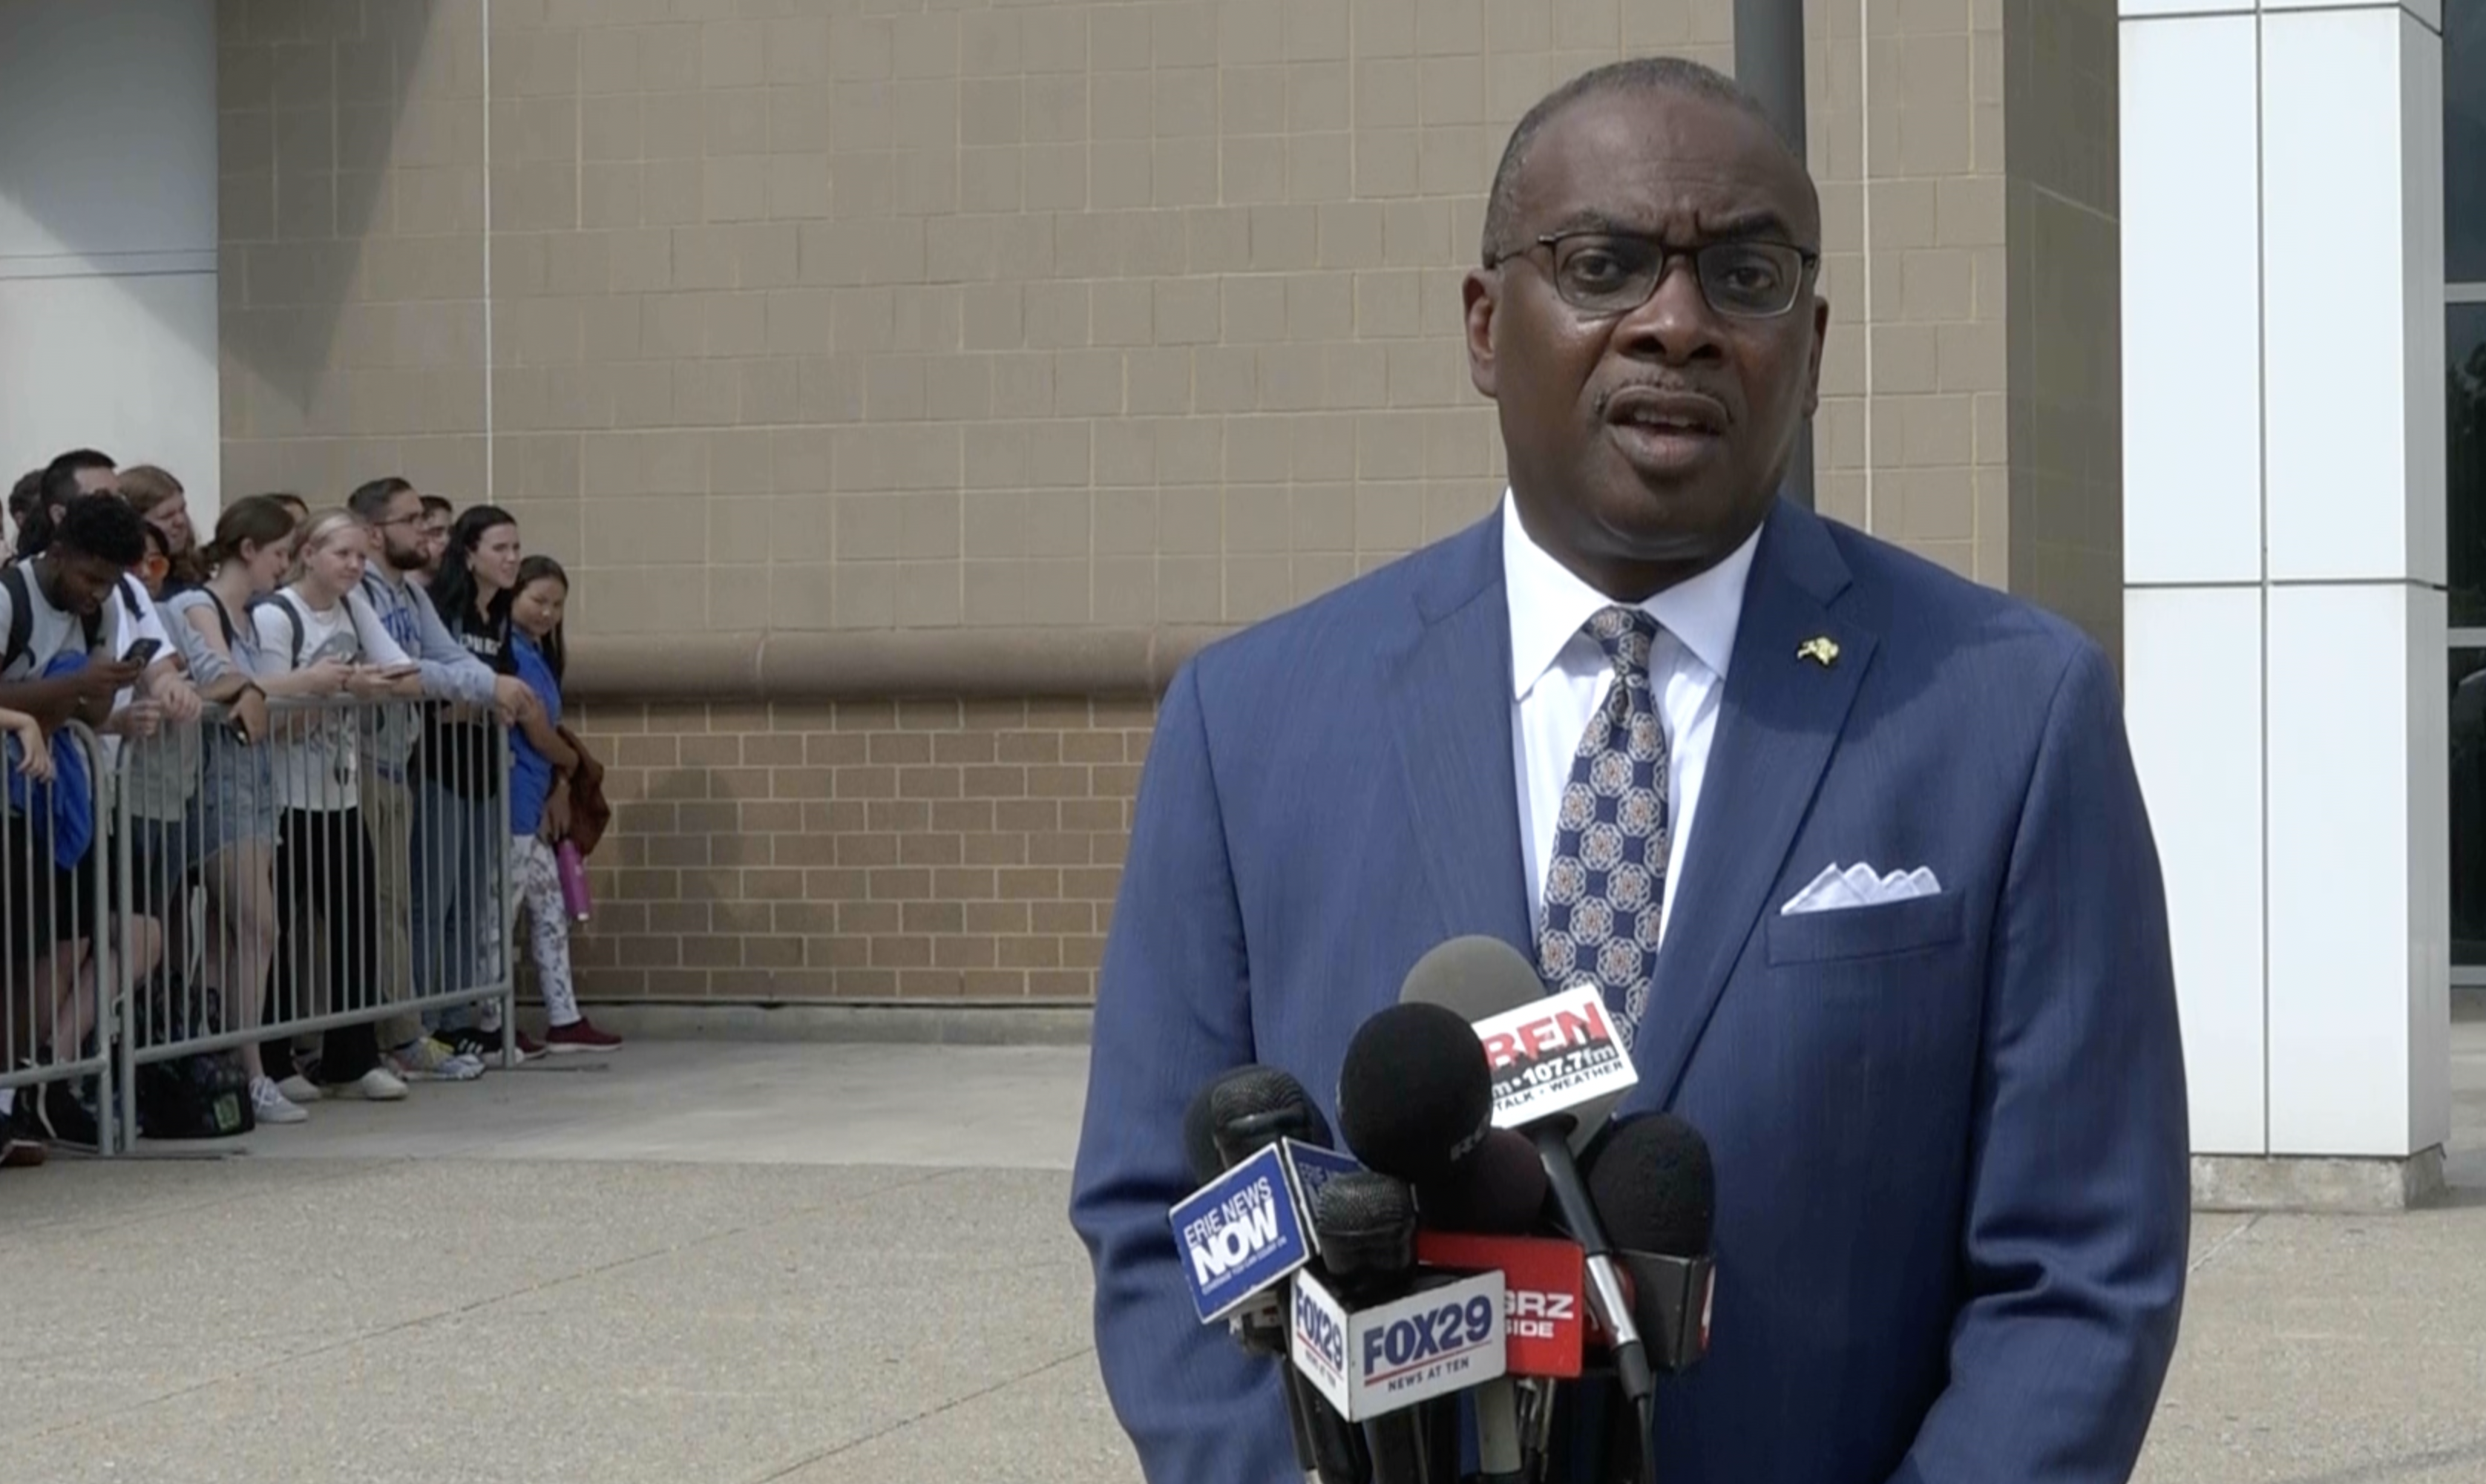 Mayor Byron Brown spoke of the Inflation Reduction Act following Vice President Kamala Harris's Sept. 14 visit. 